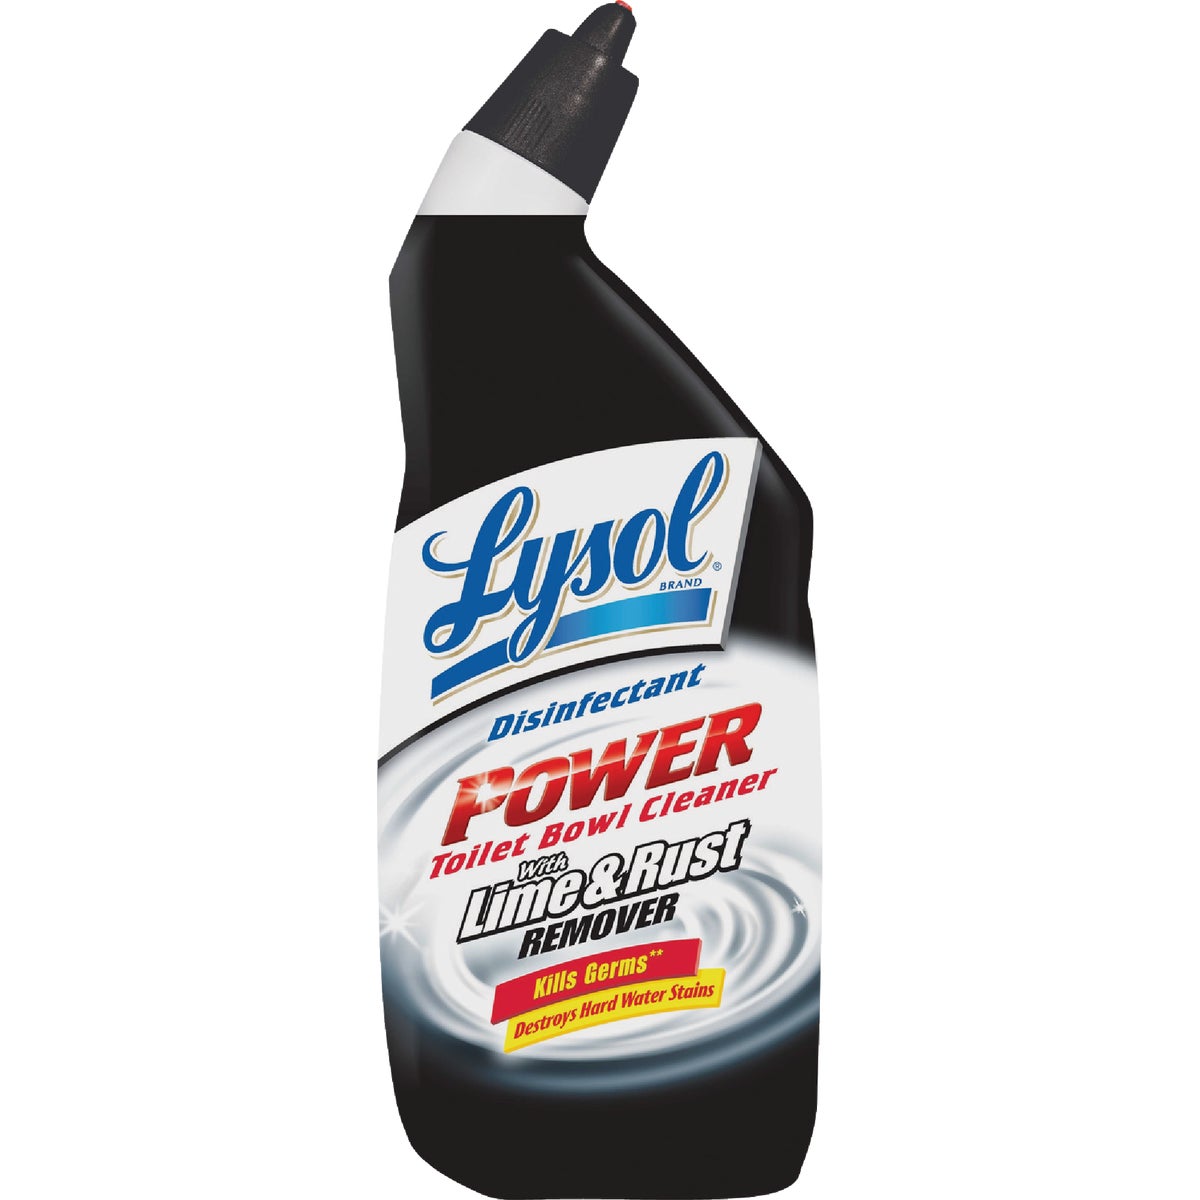 Item 600210, Lysol power toilet bowl cleaner with lime and rust remover powers through 